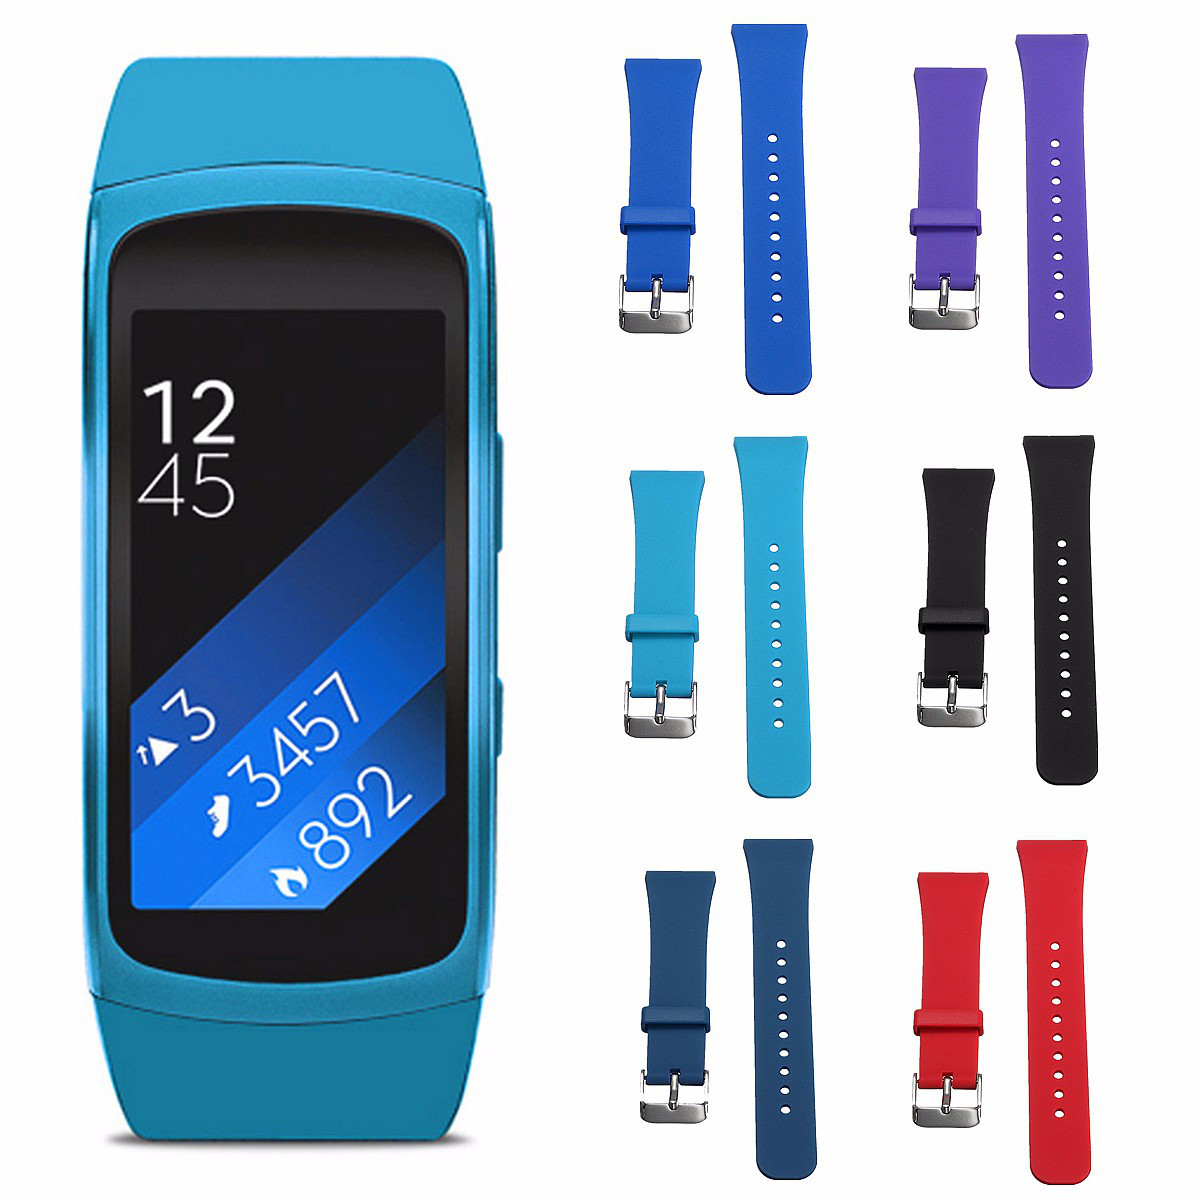 Approx-115-175cm-Silicone-Soft-Replacement-Smart-Wrist-Strap-For-Samsung-Gear-Fit-2-1087609-3